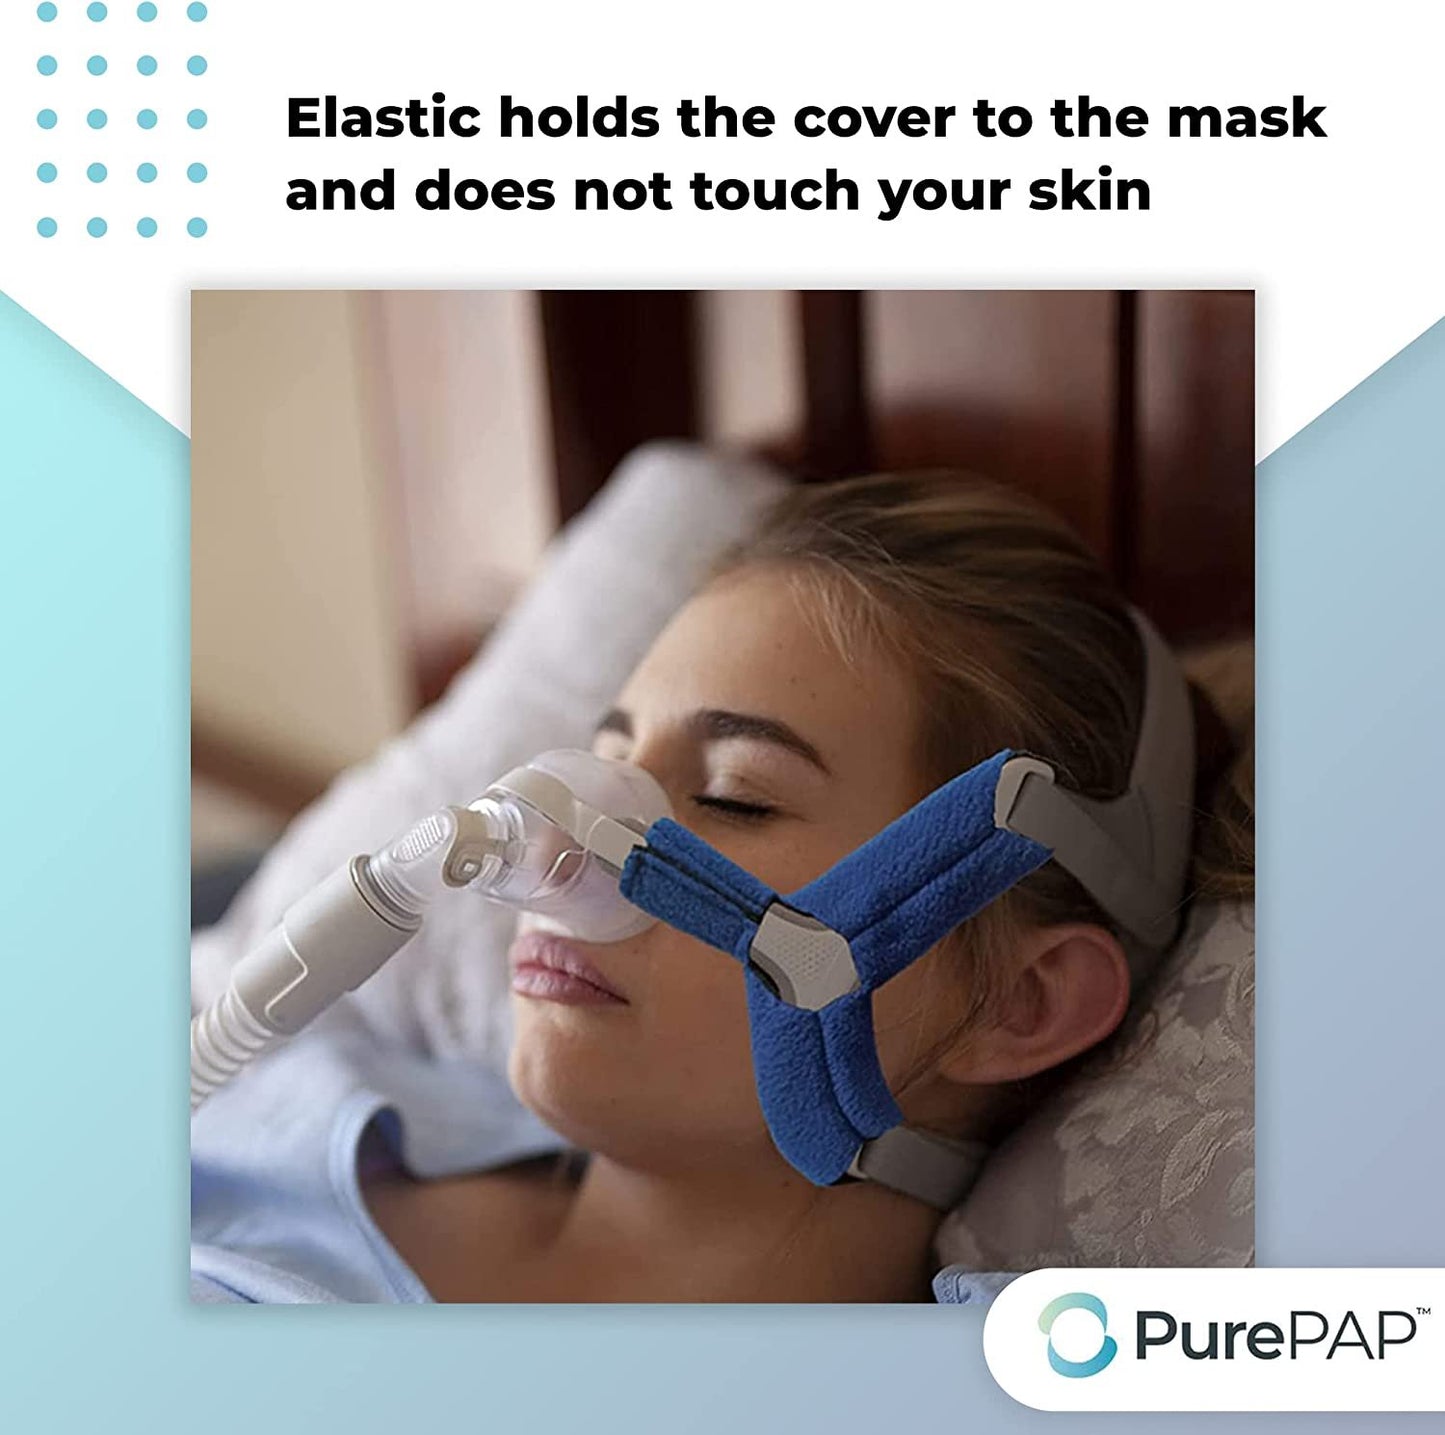 PurePap CPAP Strap Covers (2 Pack) – Wisp Style Universal CPAP Head Strap - Compatible with Respironics CPAP Supplies to Prevent Rashes – Velcro Closing Nasal CPAP Mask Strap for Better Sleep (Blue)